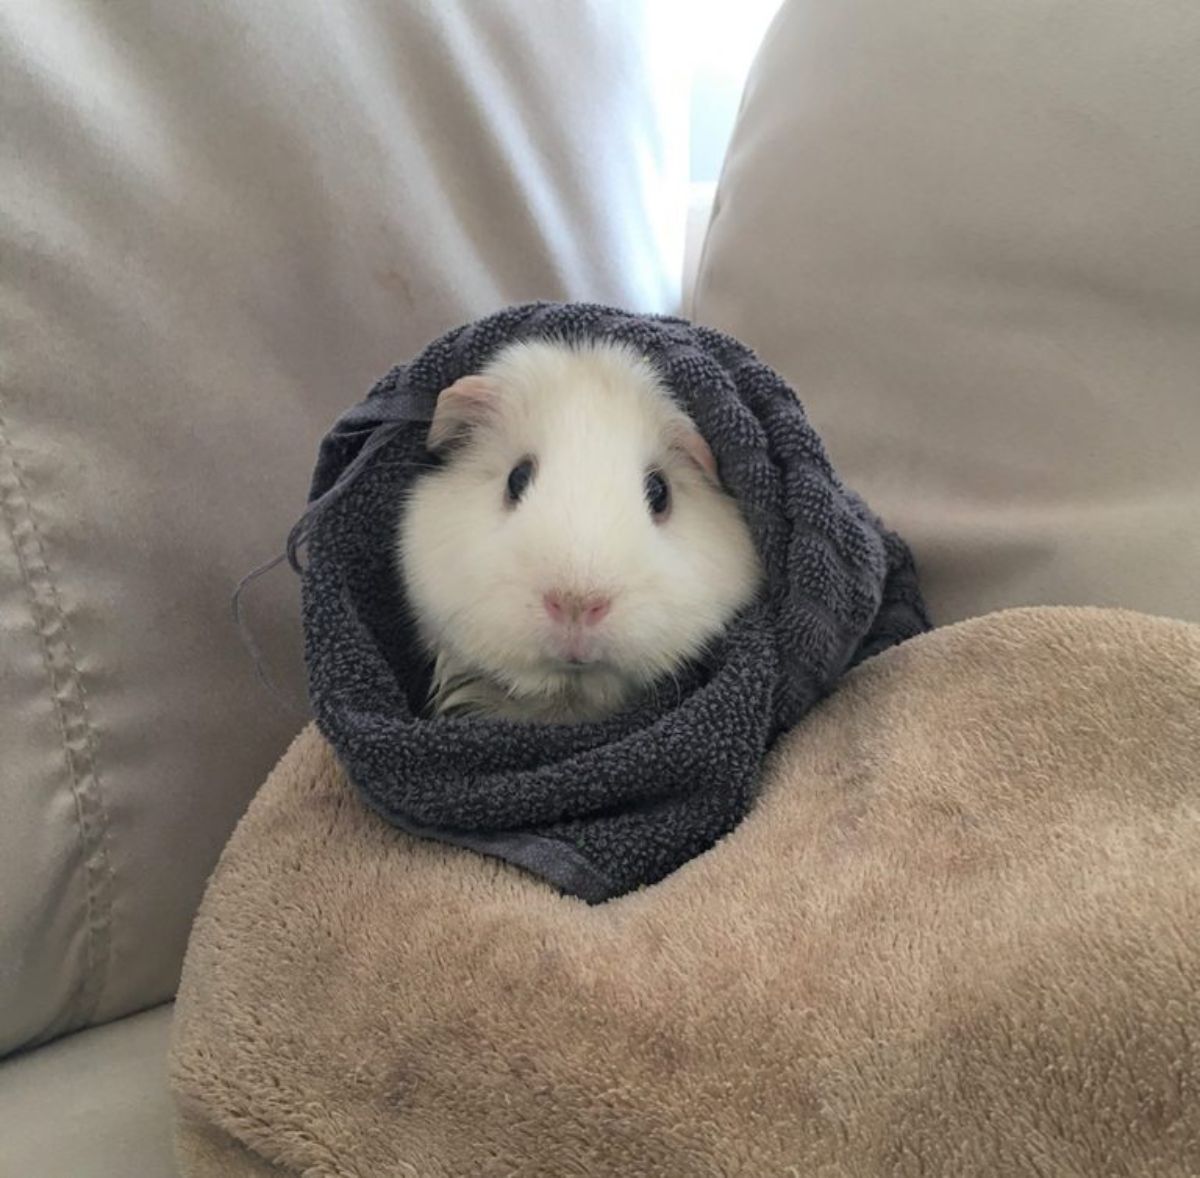 white guinea pig wrapped up in a black cloth sitting on a brown cushion